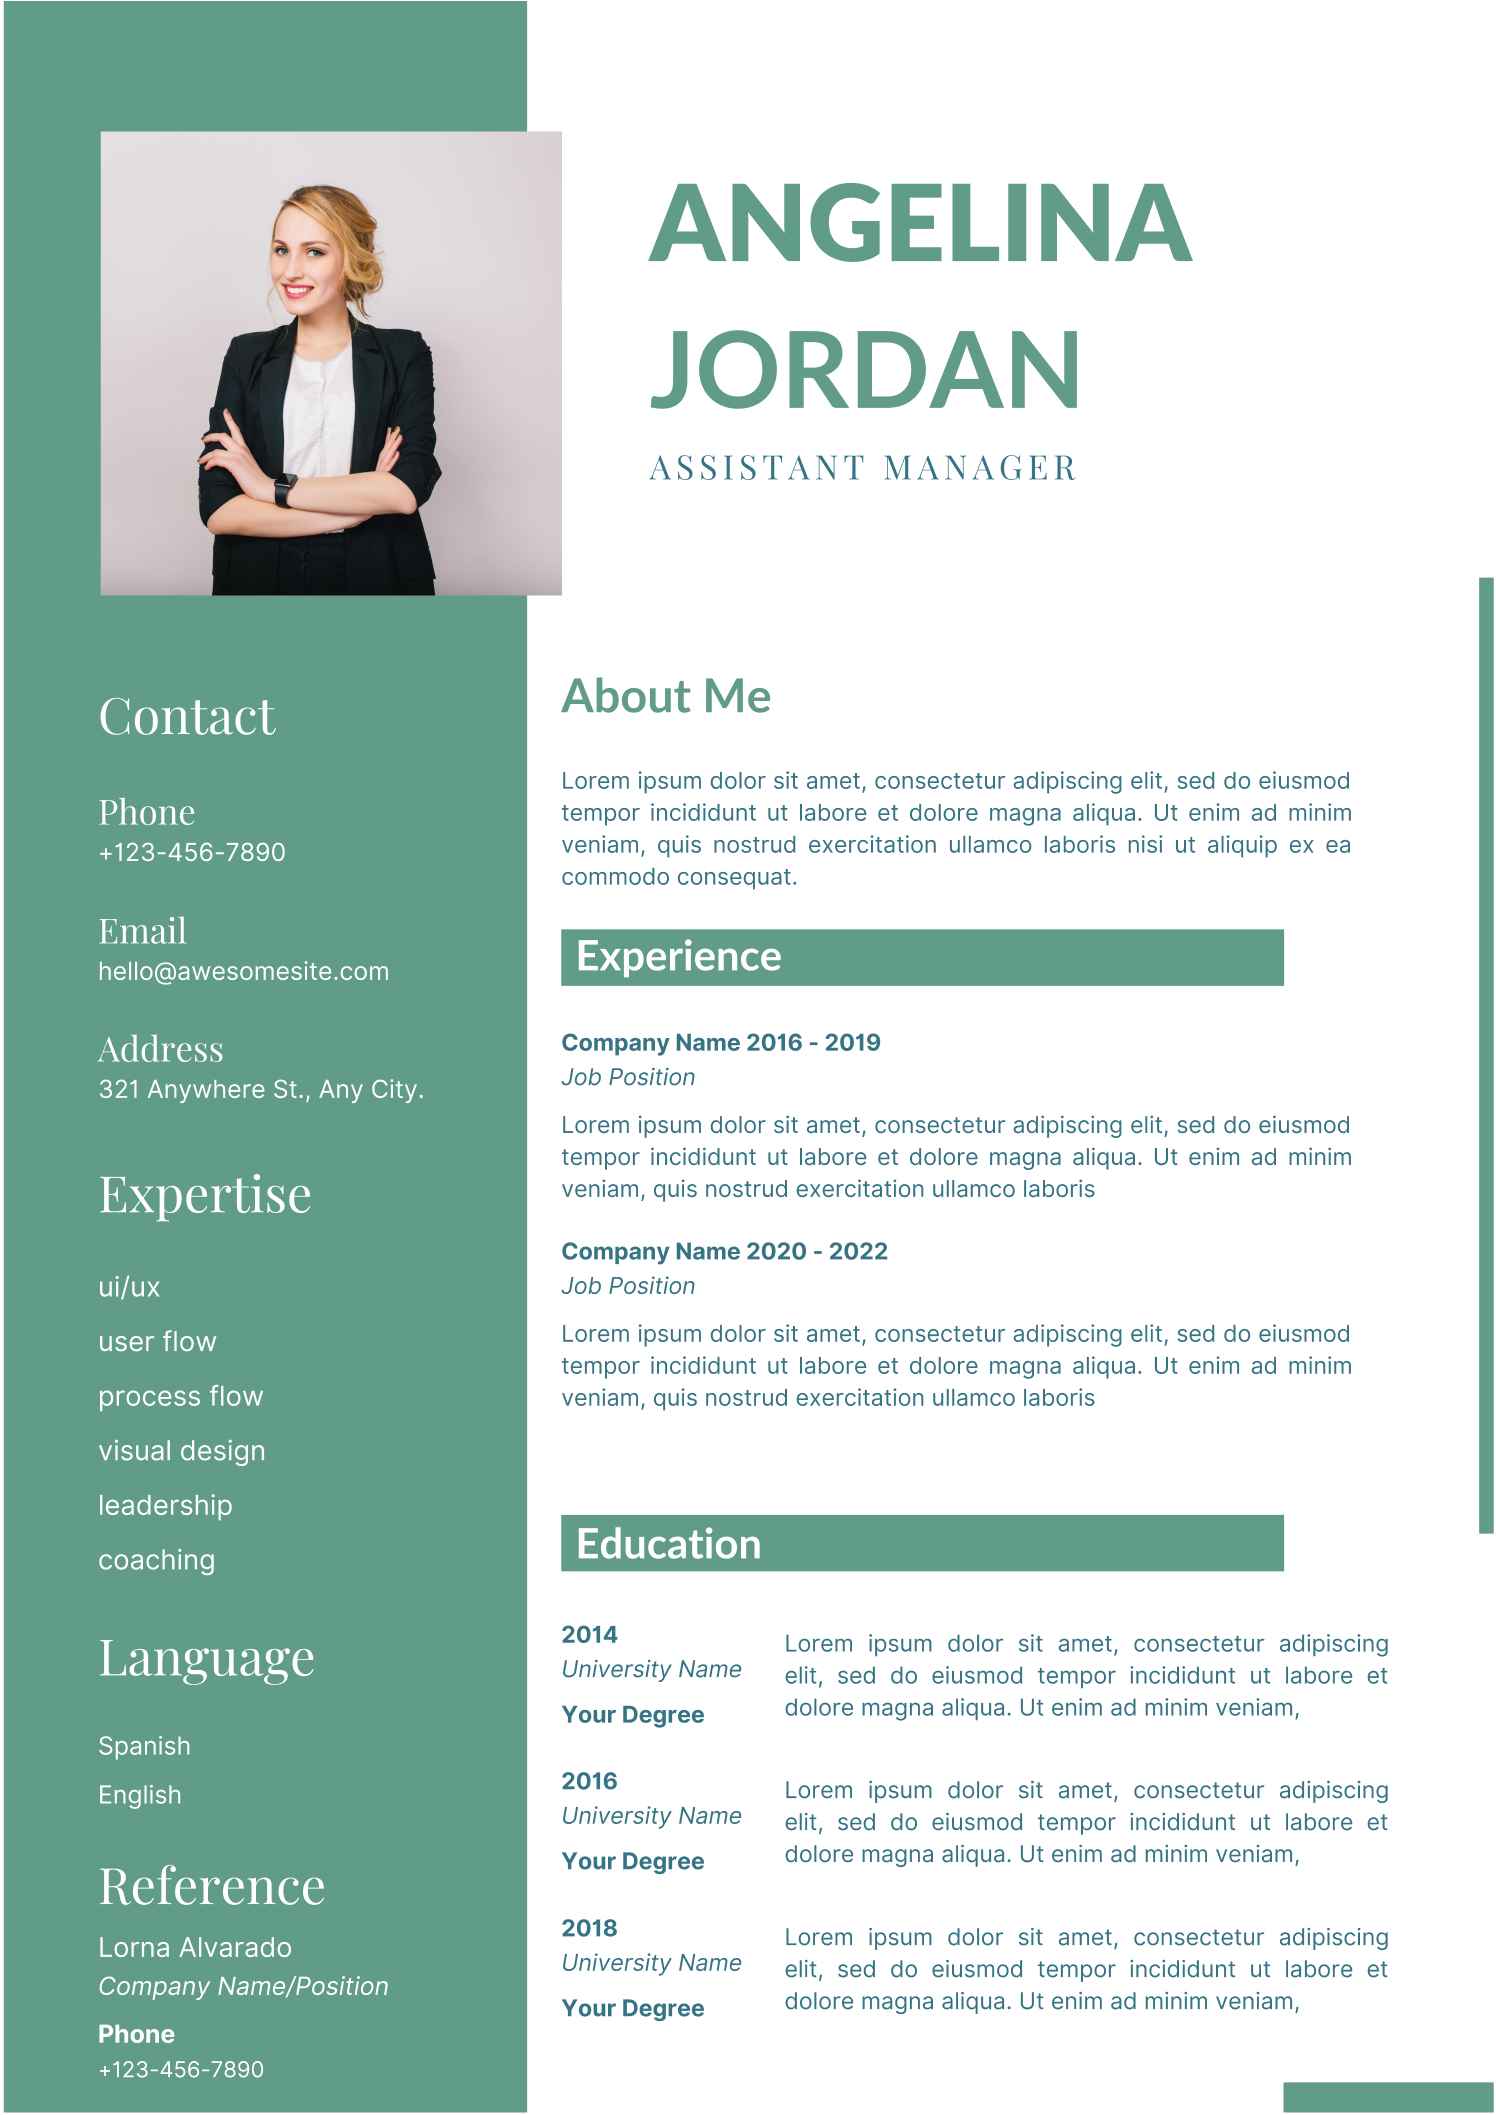 Green and white resume template.